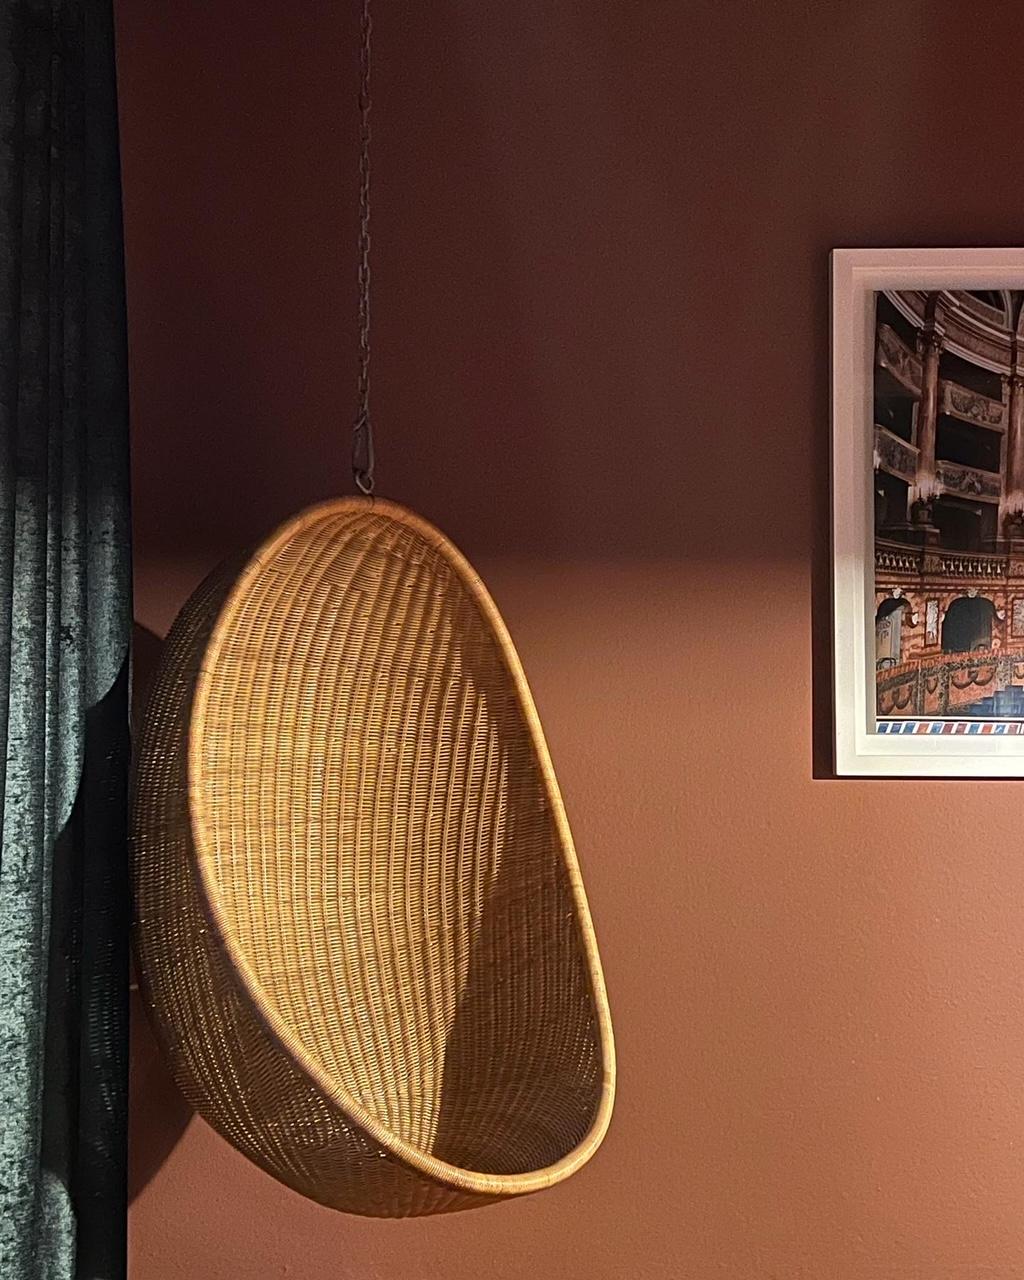 Mid-Century Modern Egg Hanging Chair by Nanna Ditzel, Authentic Historical Edition, 1959 For Sale